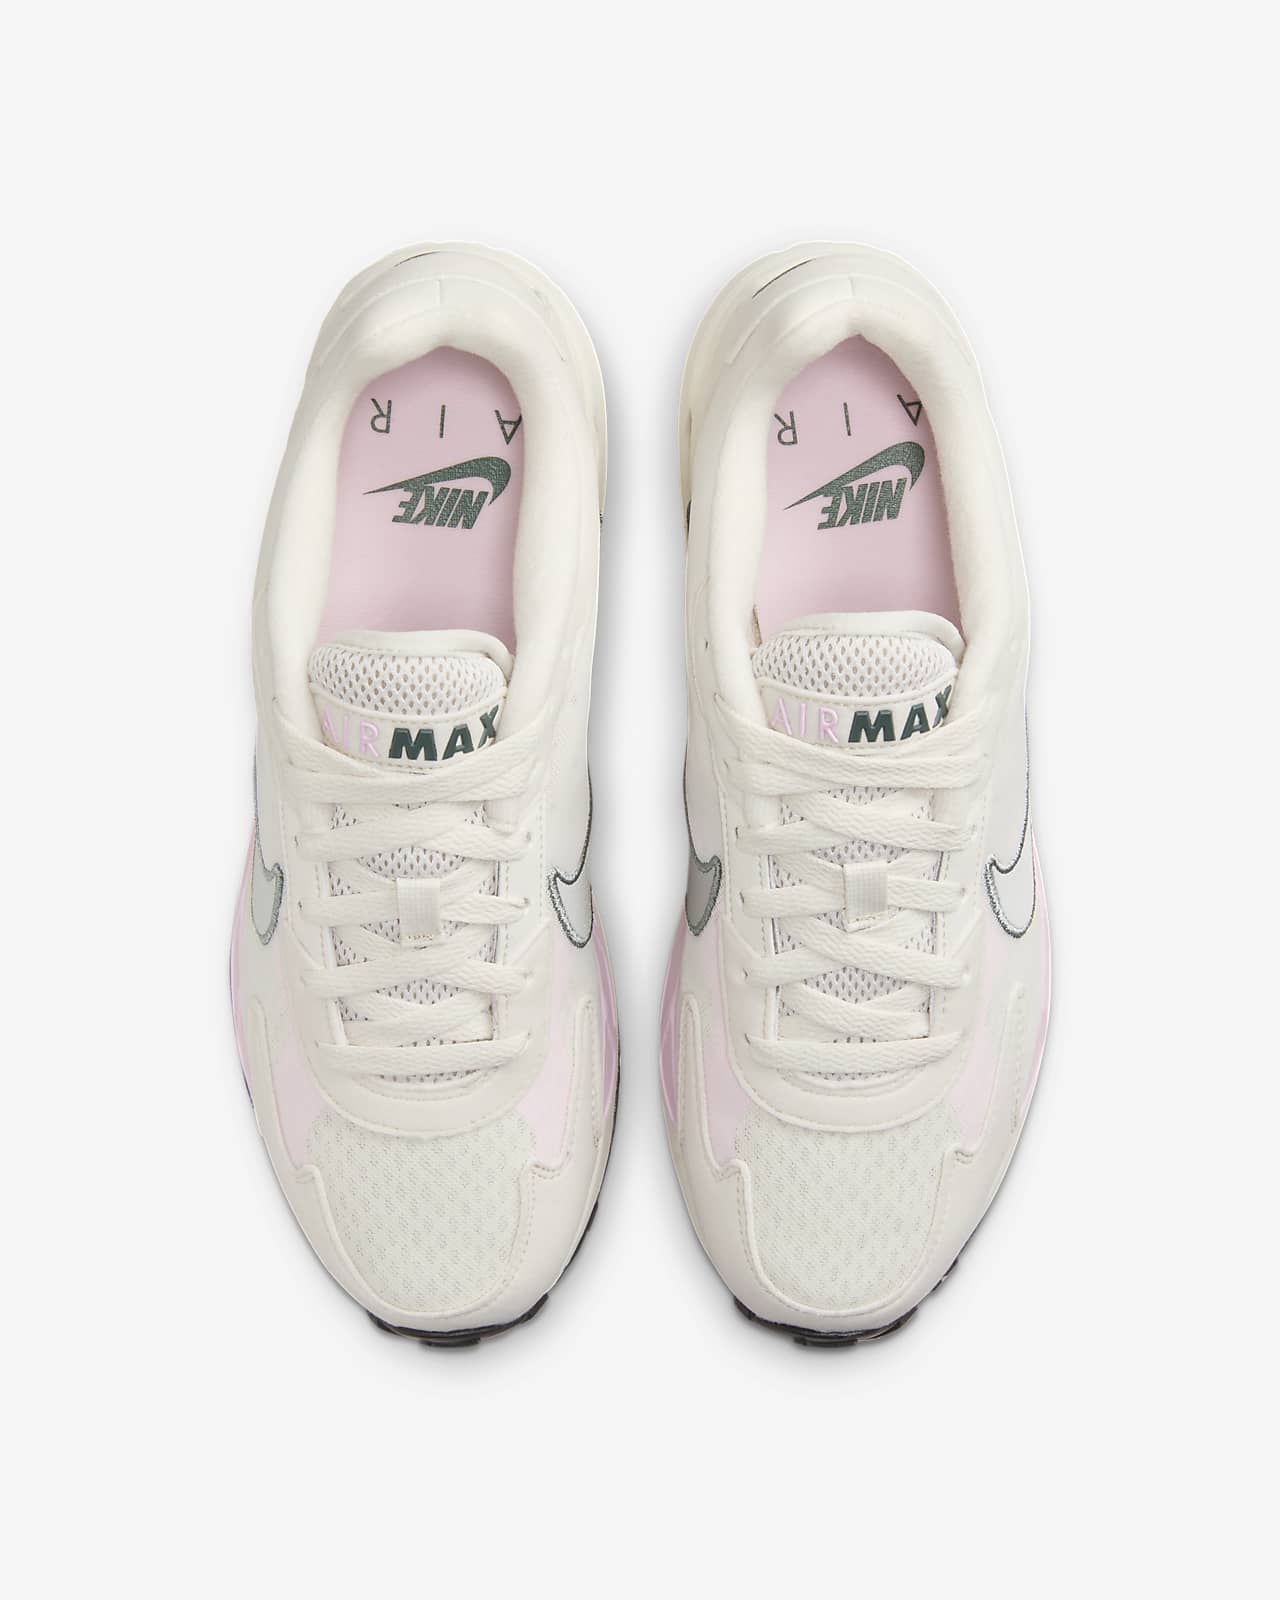 NIKE Air Max Bolt Running Shoes For Women - Buy NIKE Air Max Bolt Running  Shoes For Women Online at Best Price - Shop Online for Footwears in India |  Flipkart.com